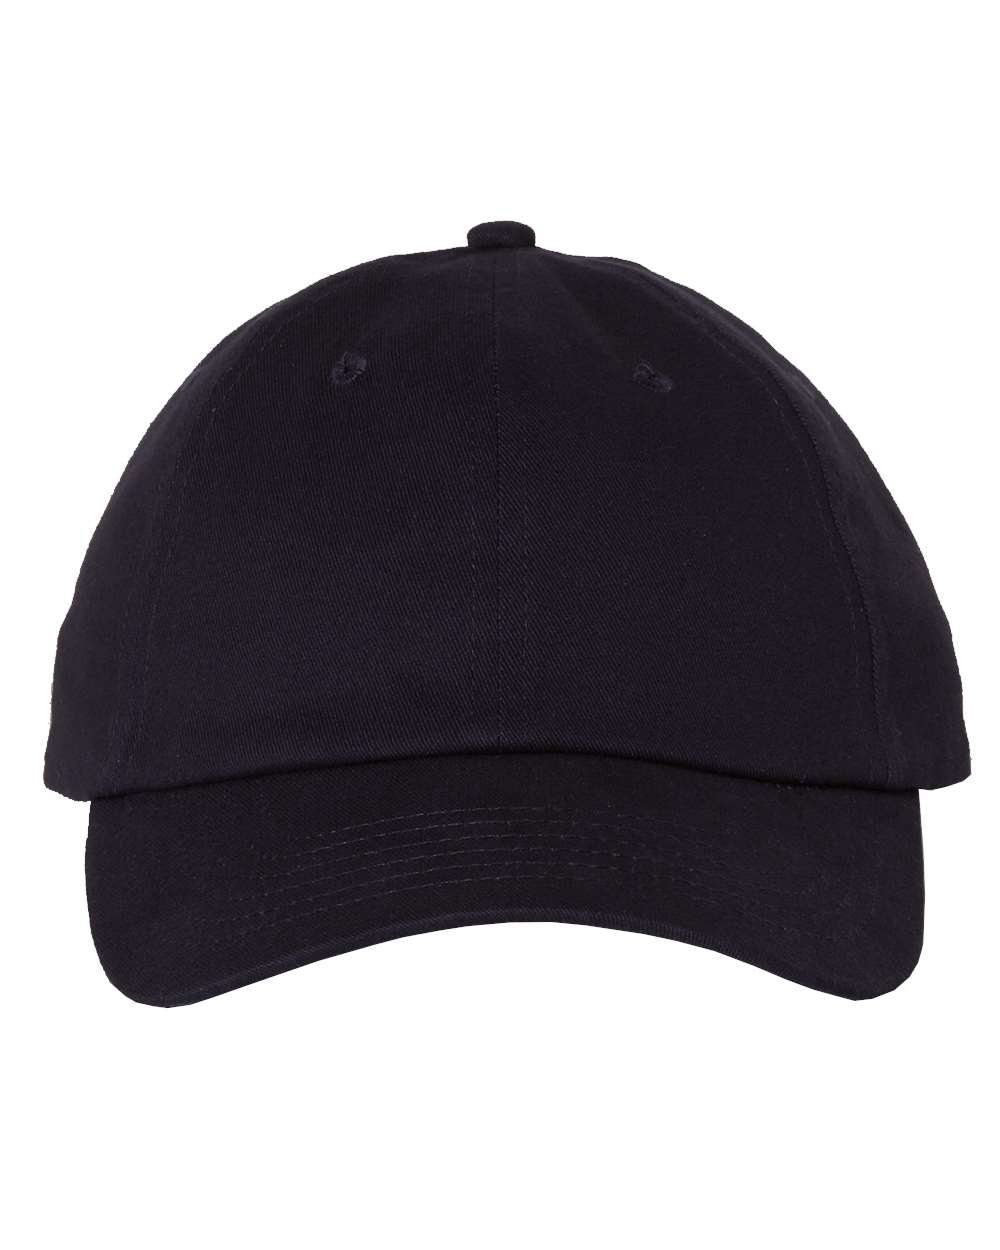 Adult Brushed Twill Cap, Navy